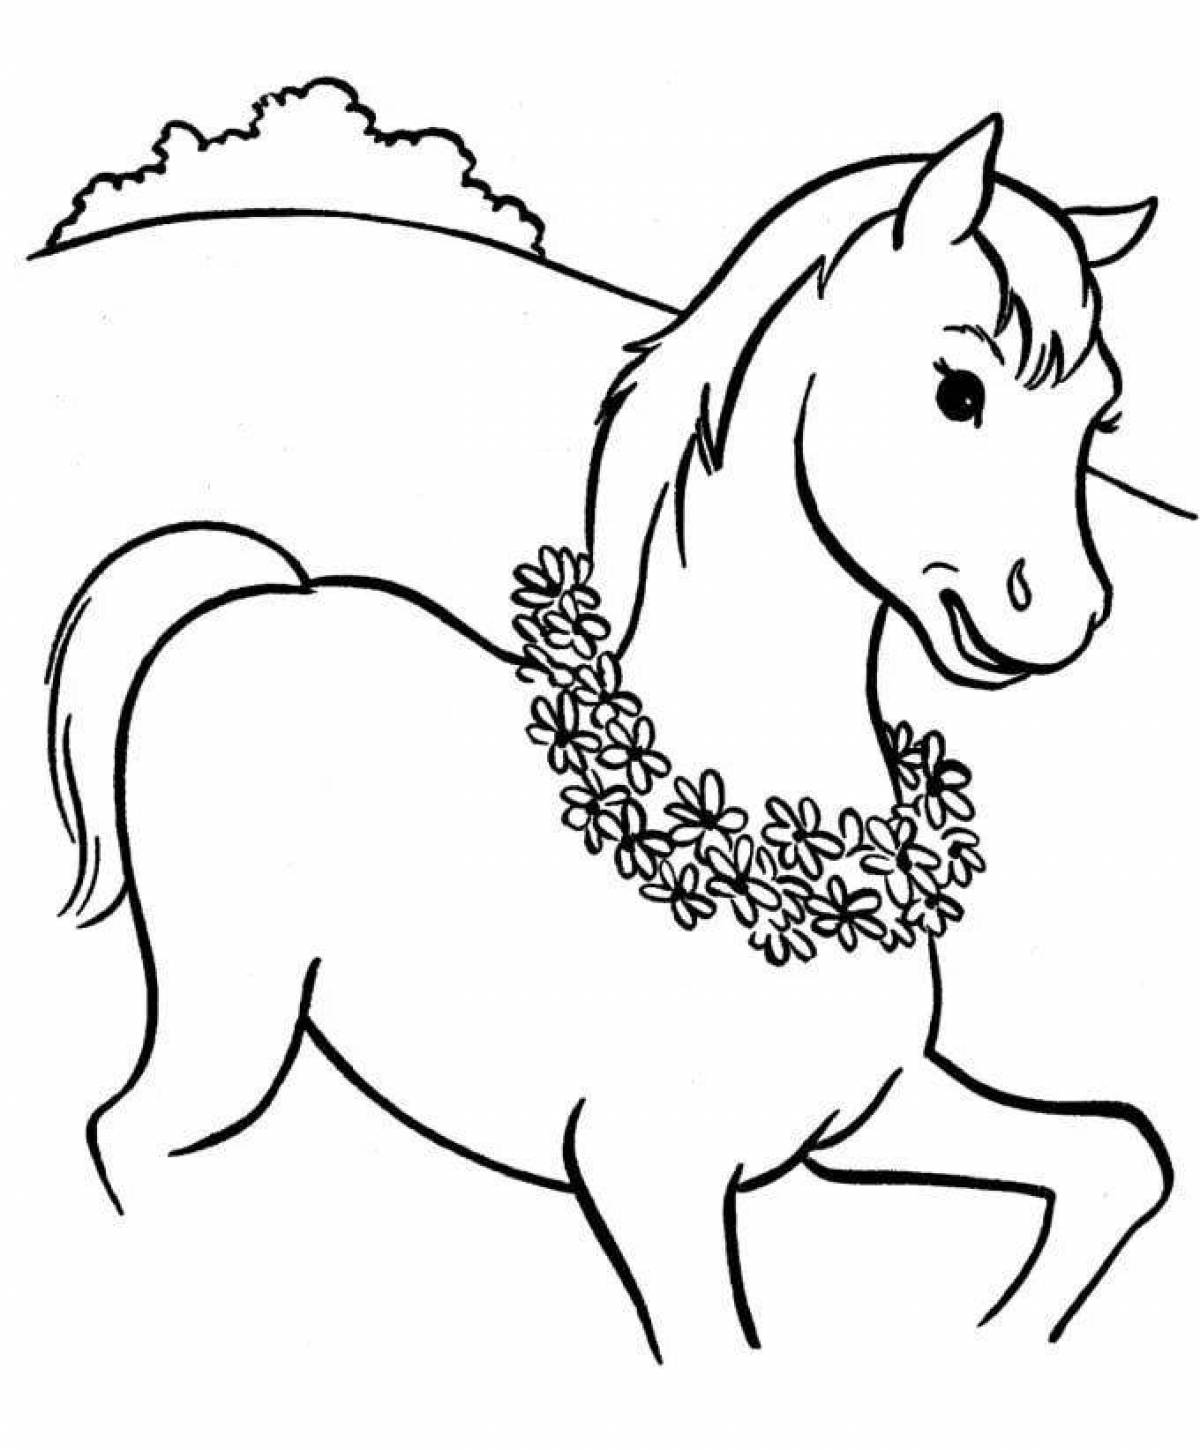 Black galloping horse coloring book for kids